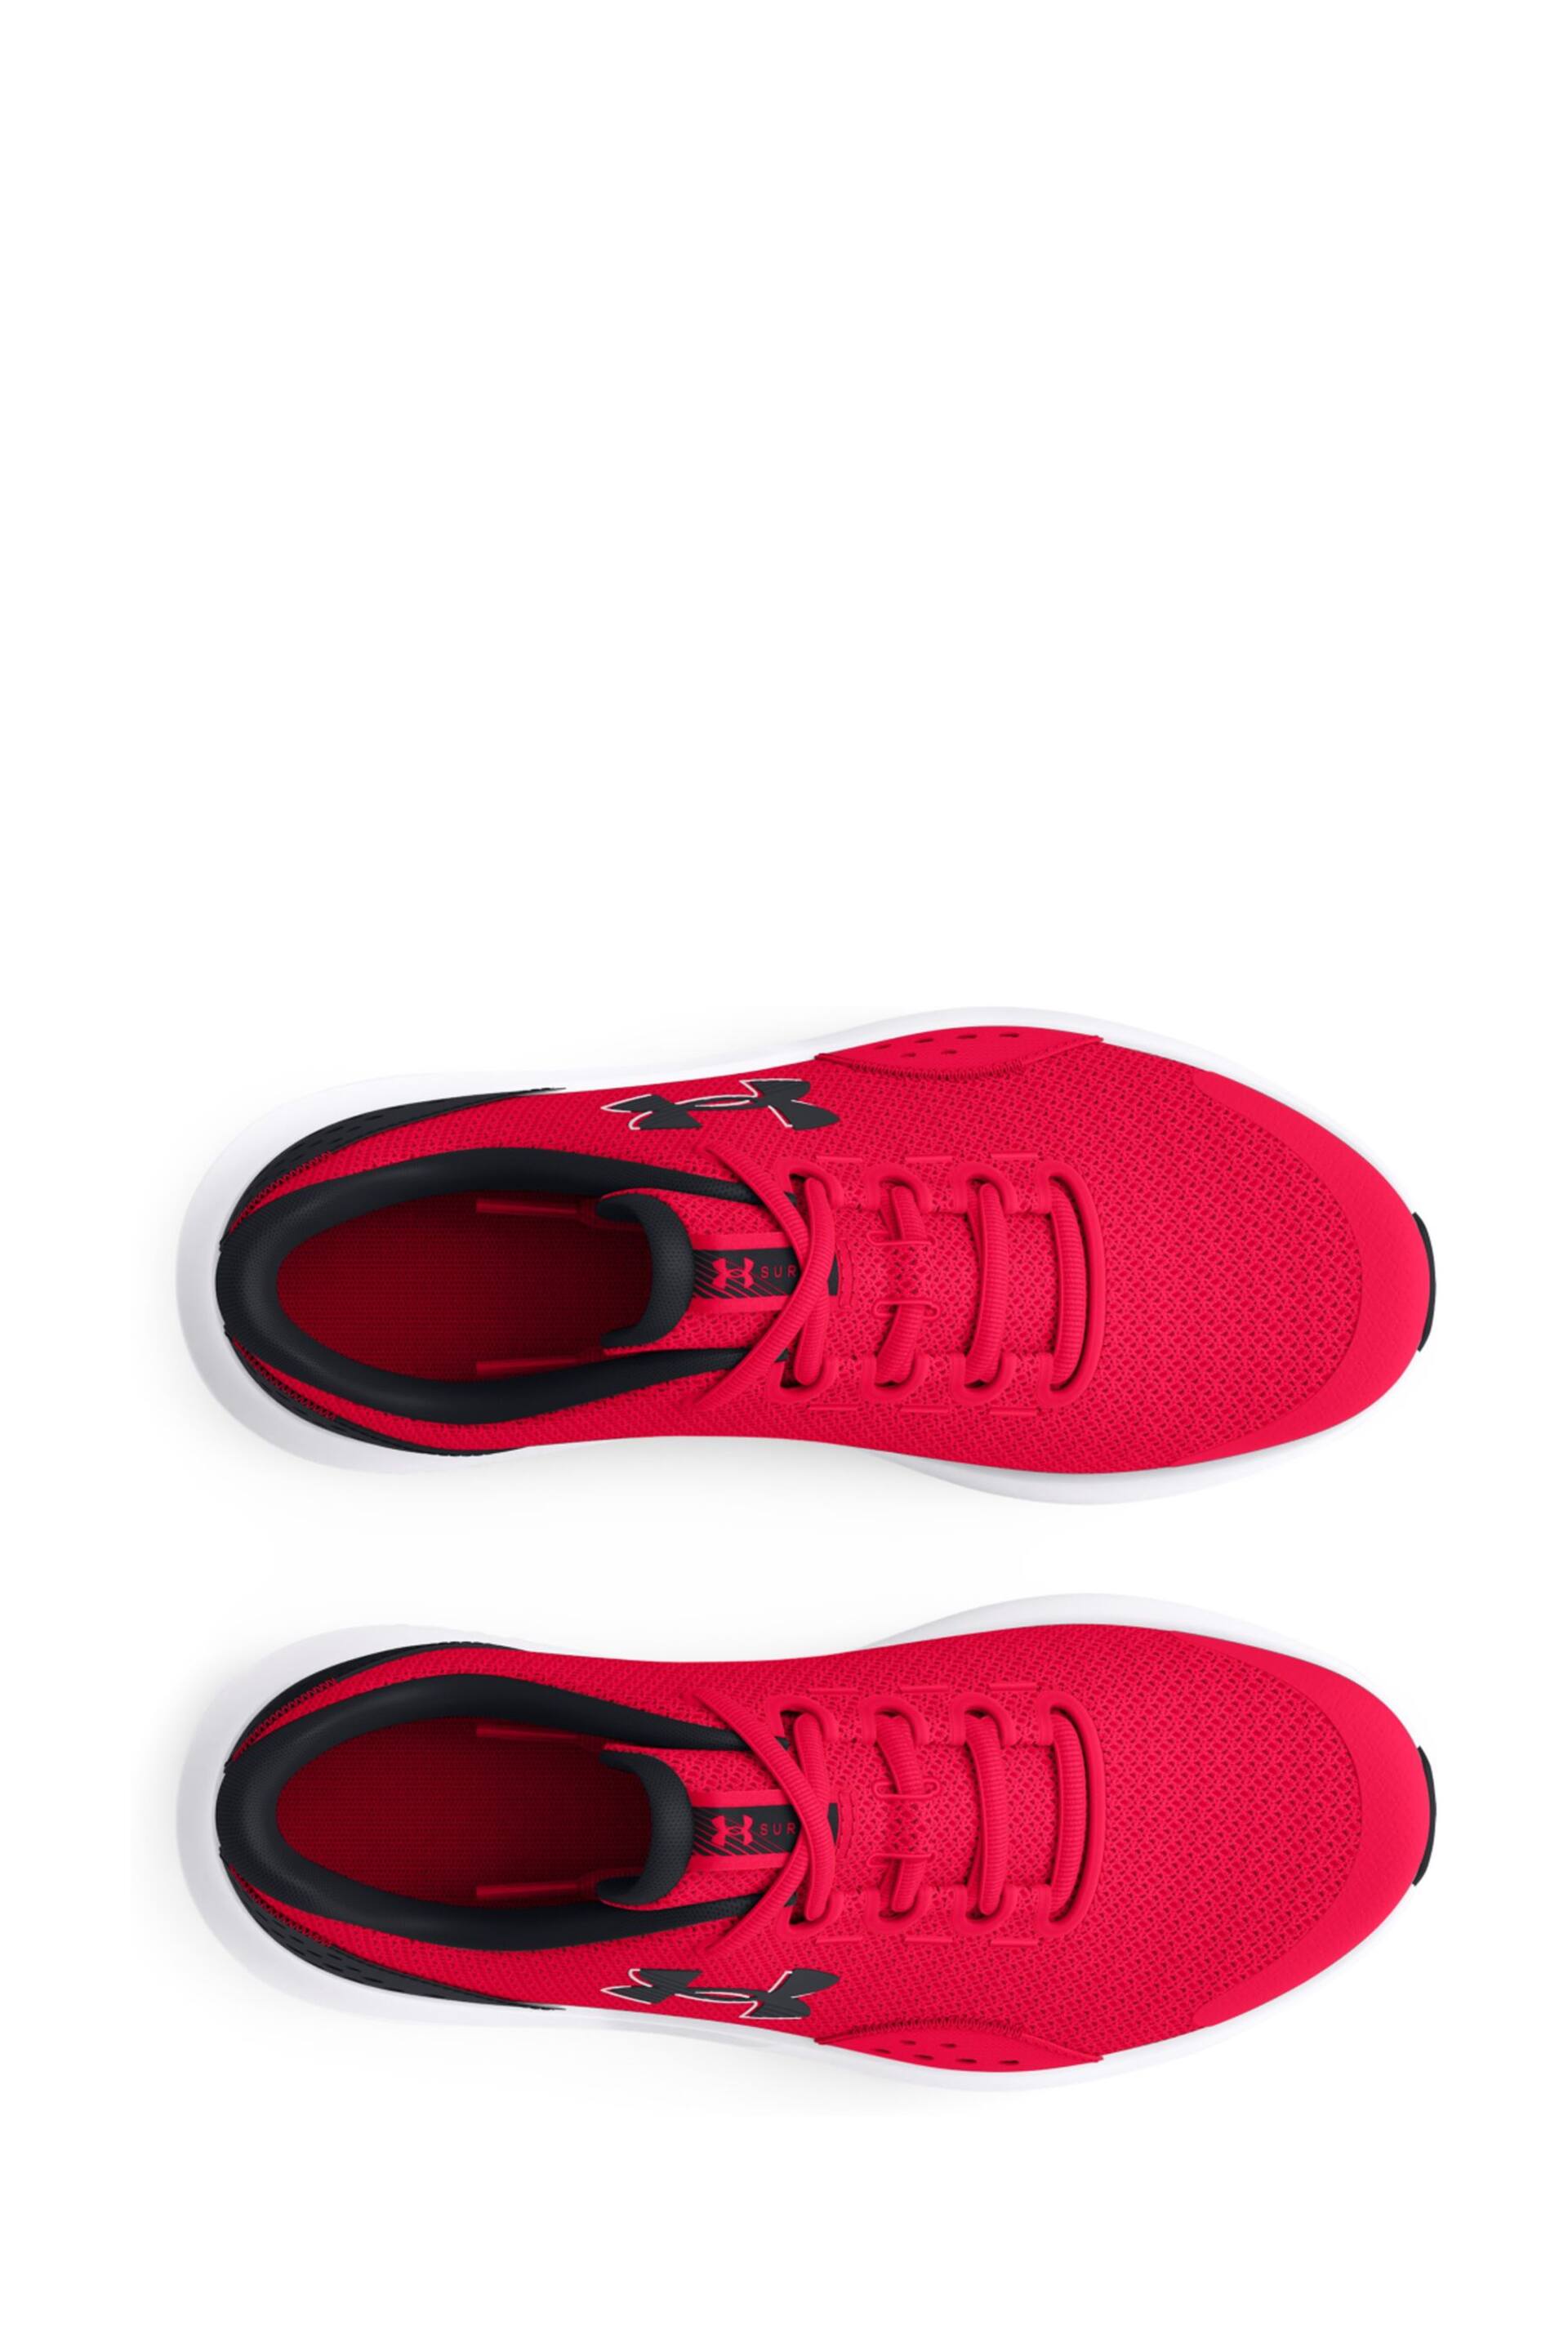 Under Armour Red Surge 4 Trainers - Image 7 of 7